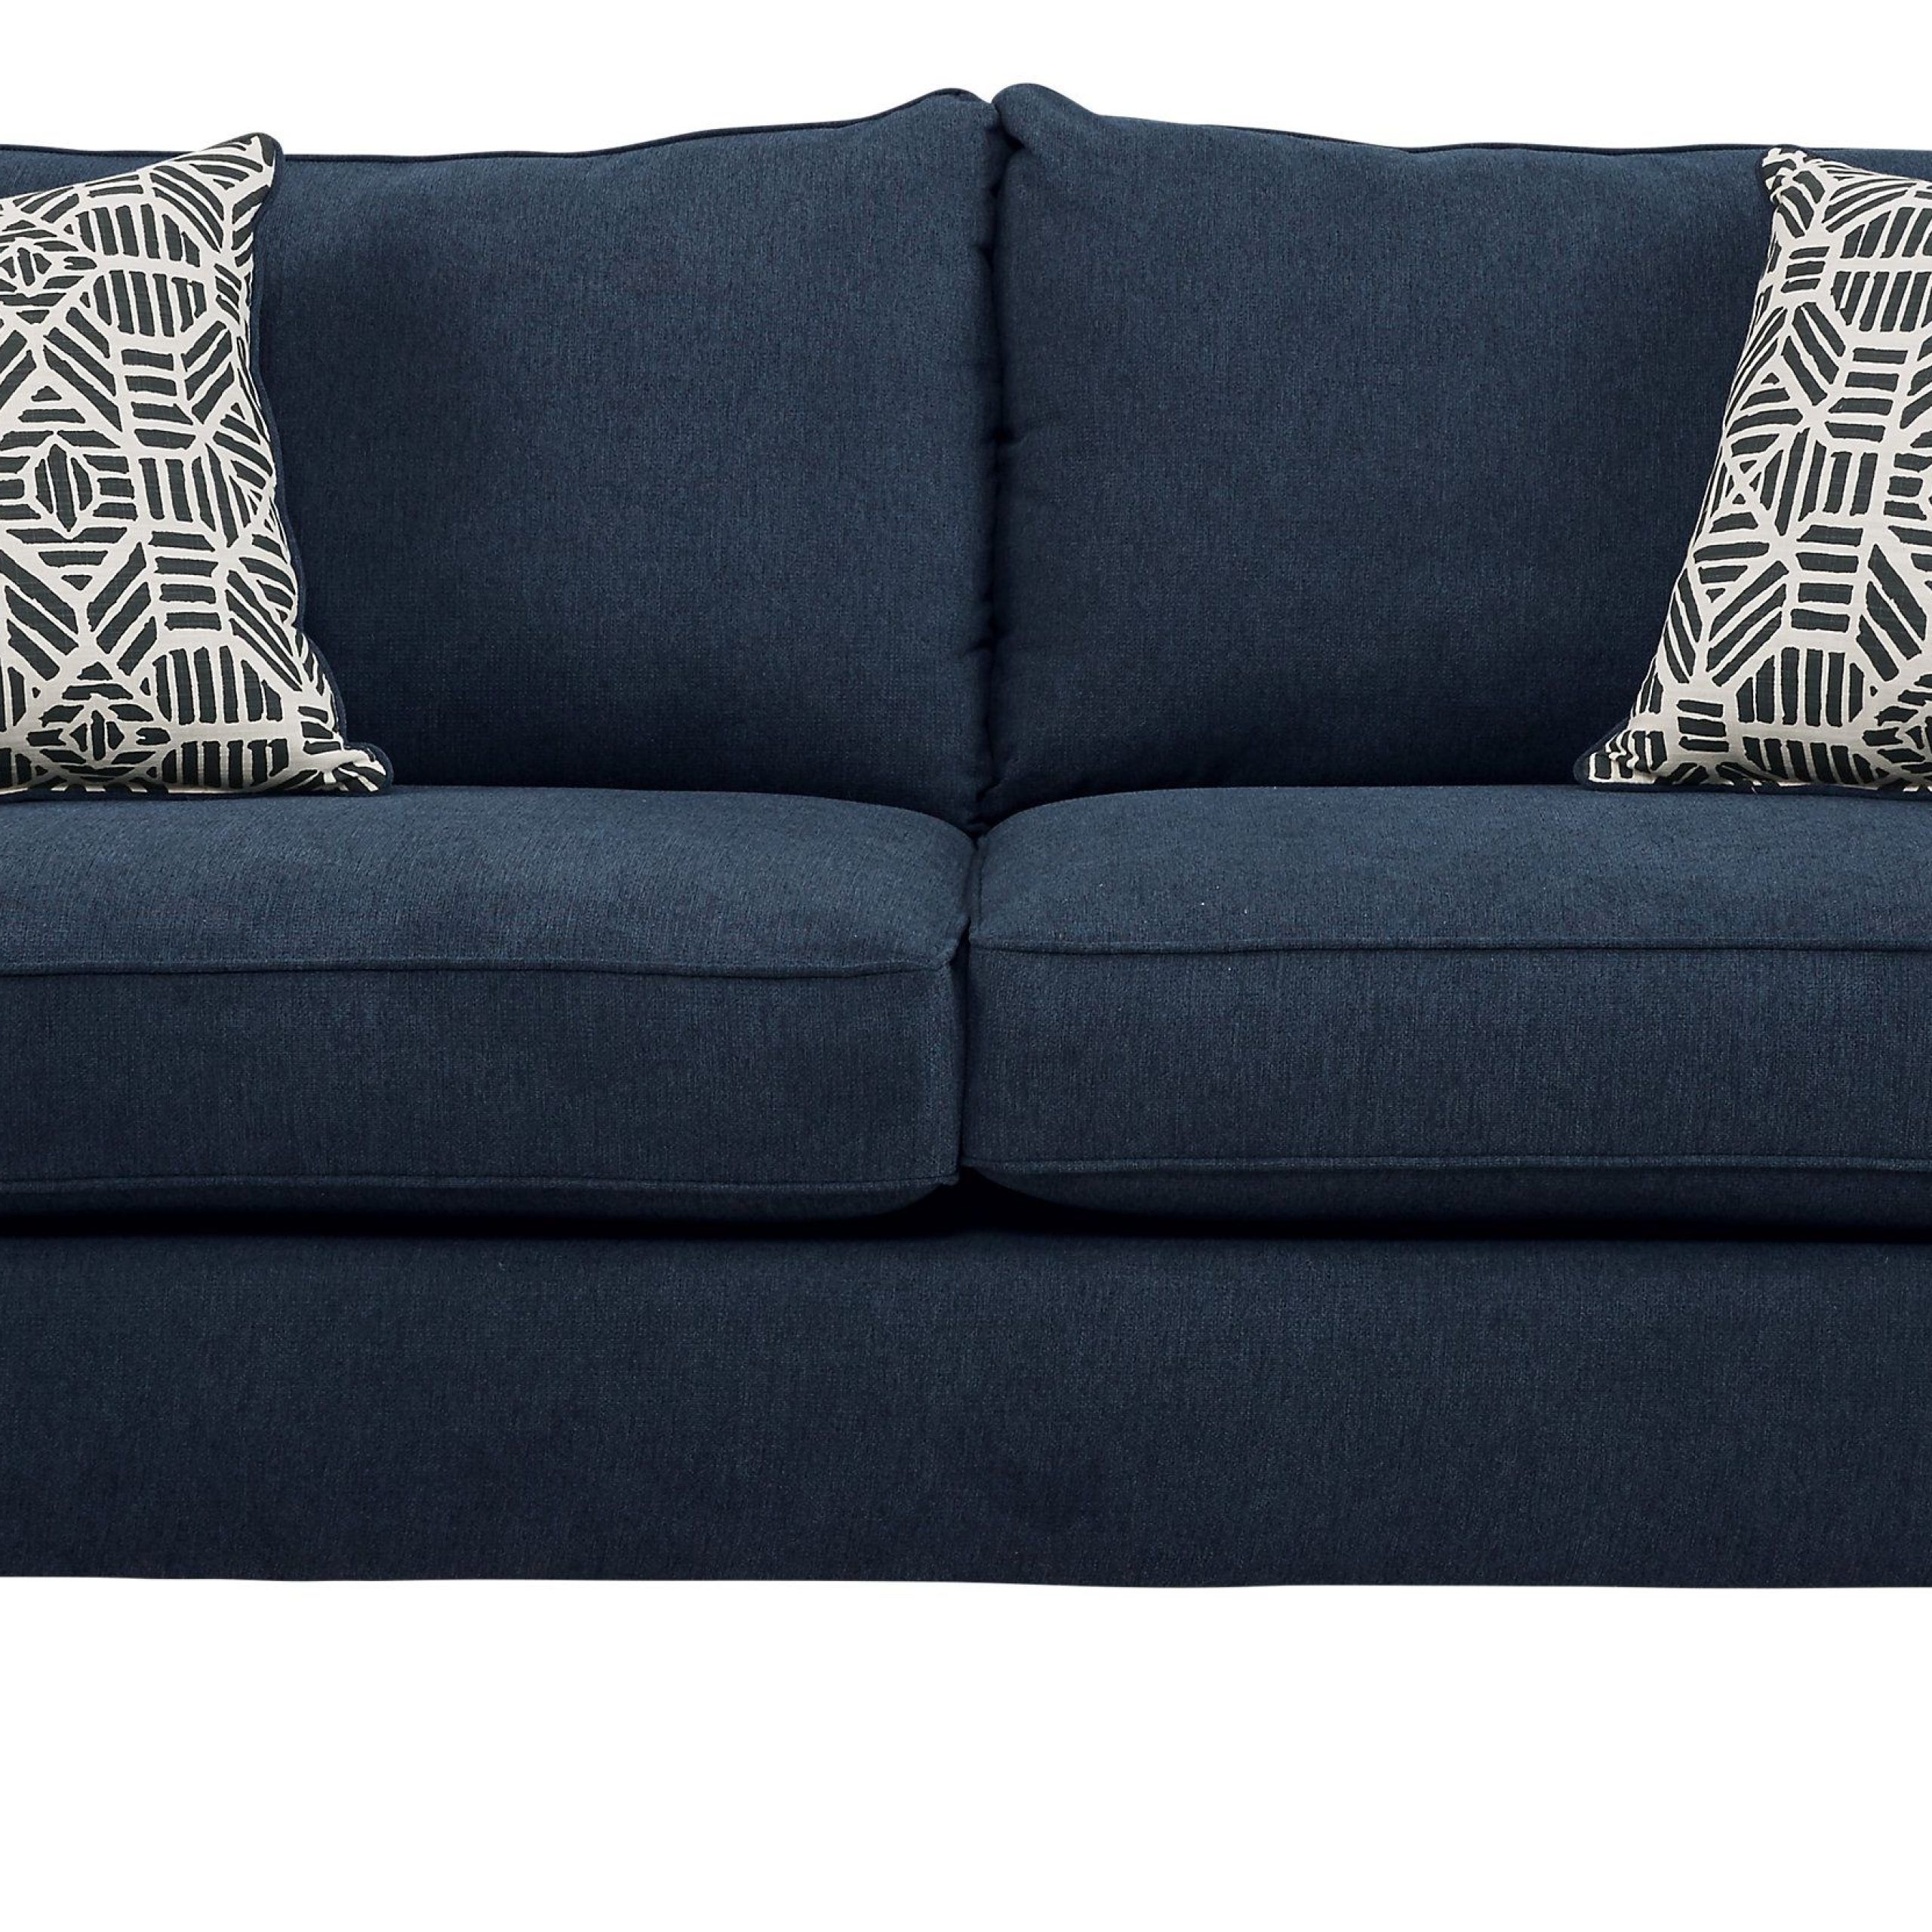 Emsworth Navy Sleeper Sofa – Casual, Textured Sofa Bar, Sofa Couch Throughout Navy Sleeper Sofa Couches (View 2 of 20)